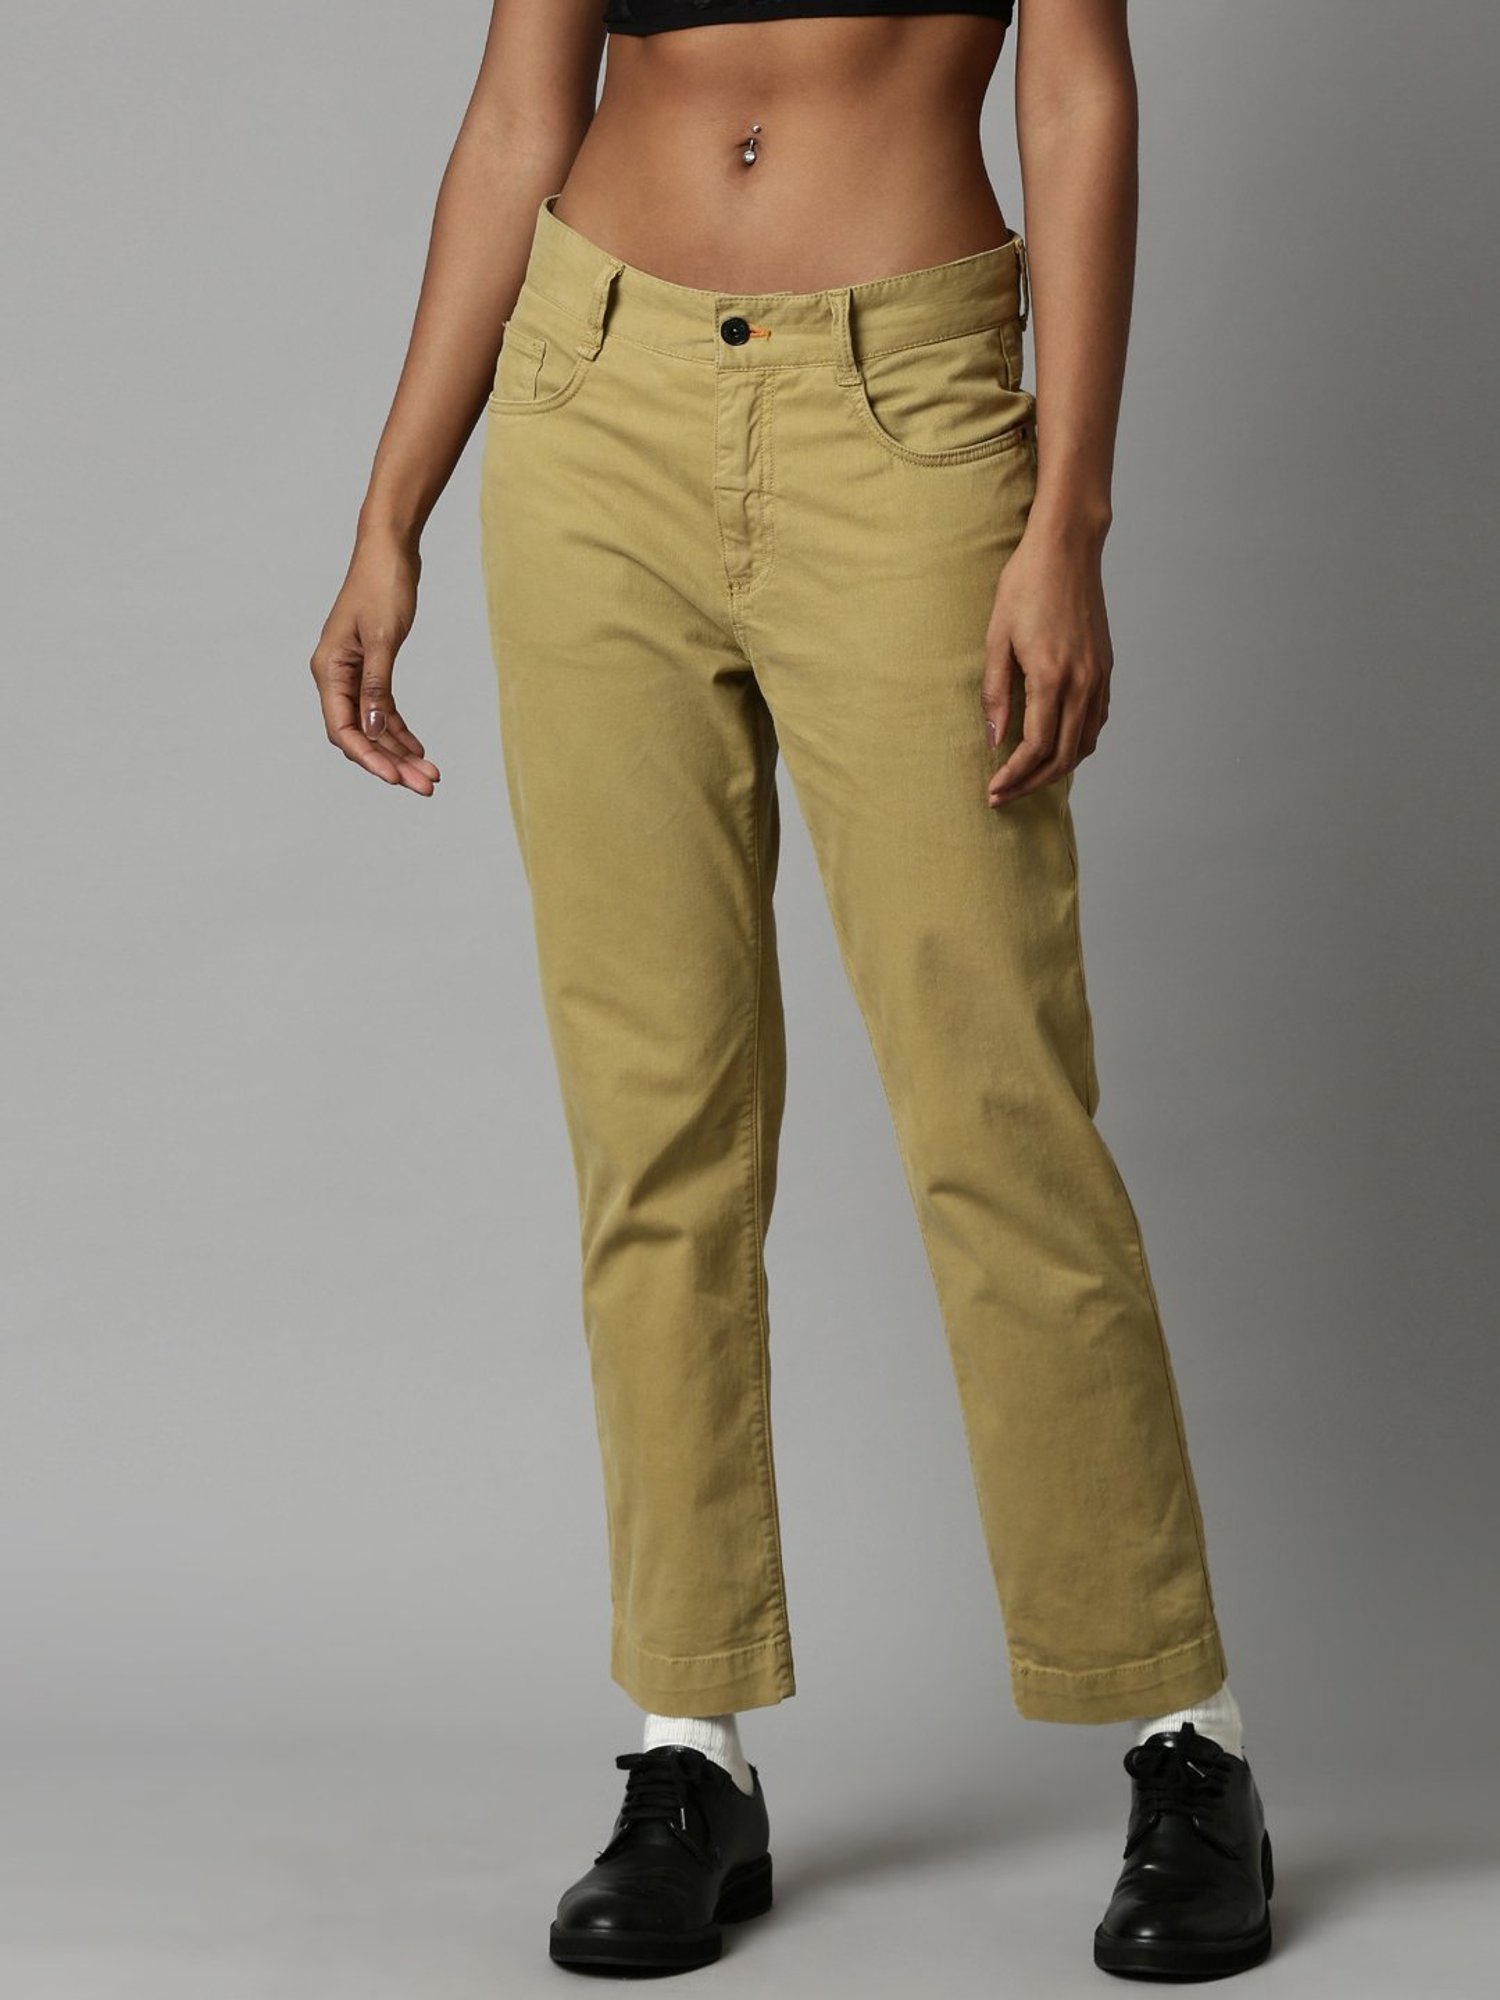 Buy CELIO Mens Solid Casual Trousers online